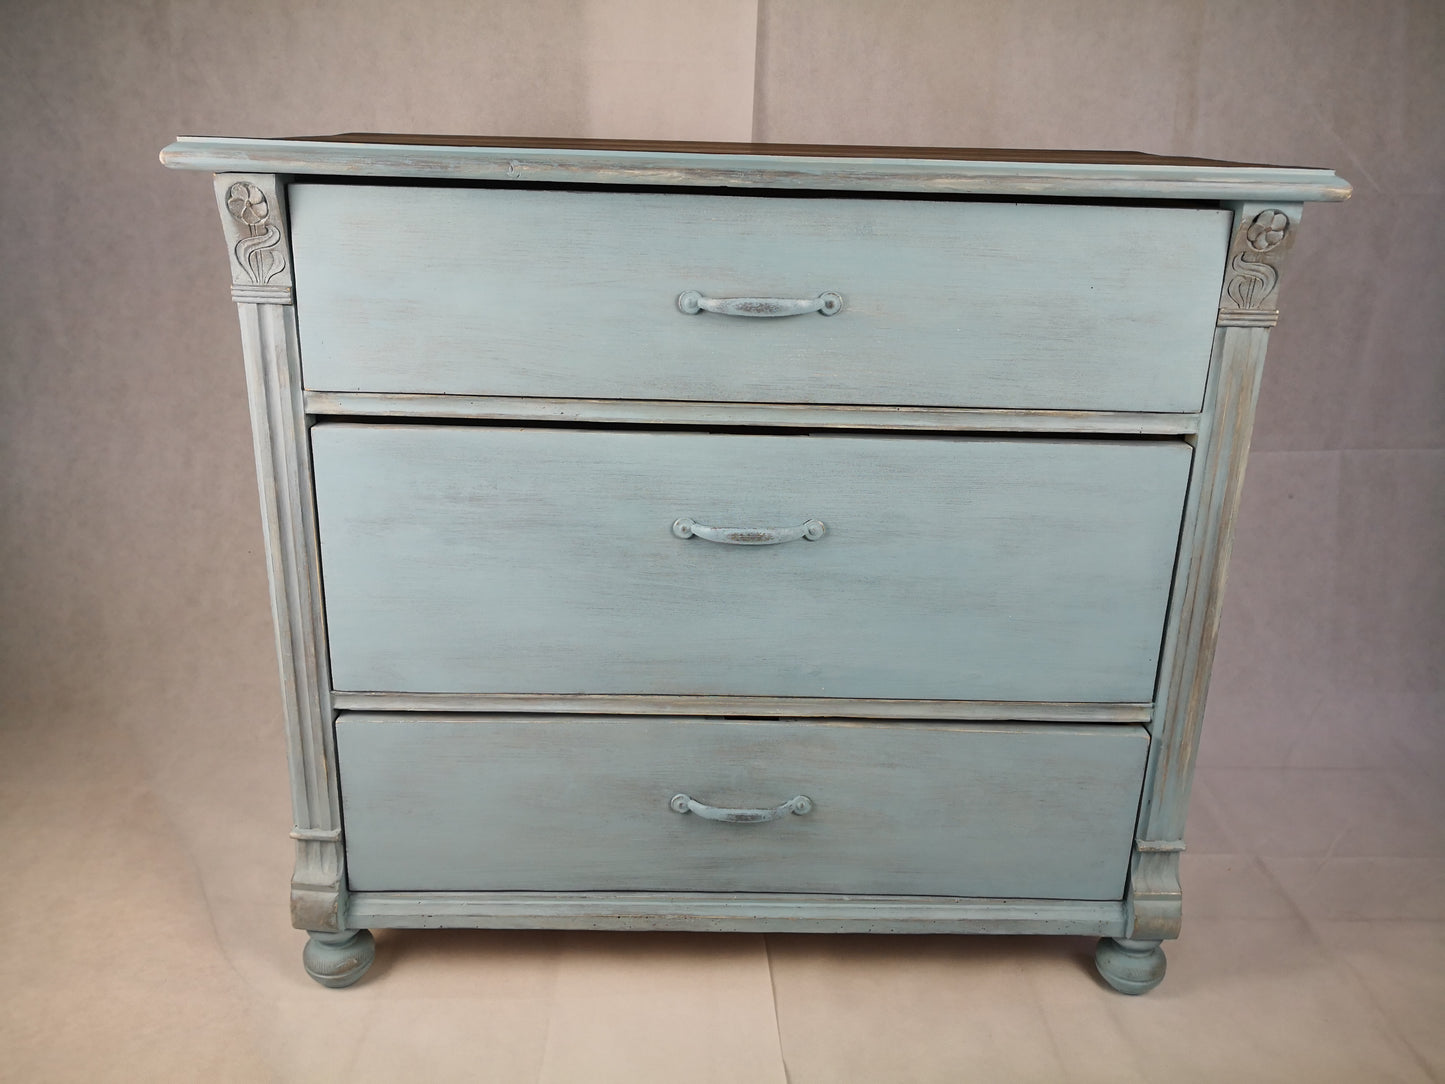 Vintage Kommode restyle in french blue